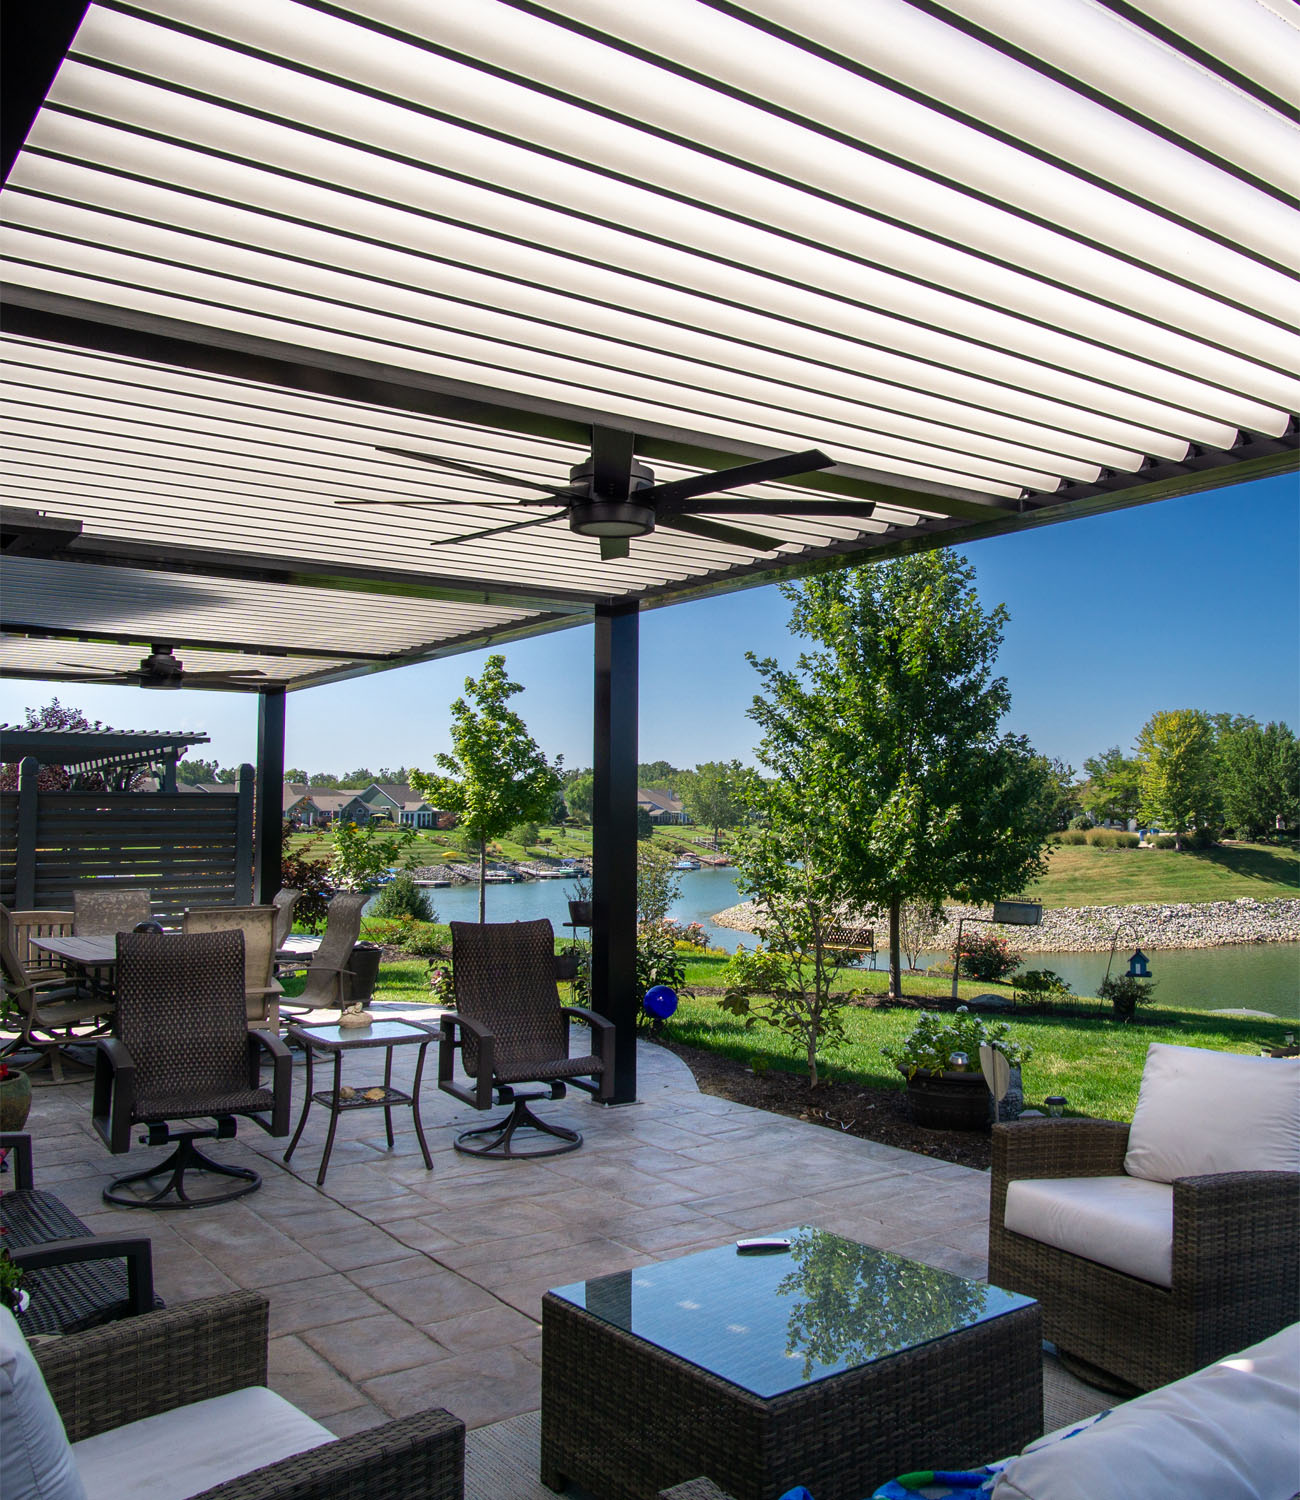 Customized motorized aluminum pergola which features ceiling fan